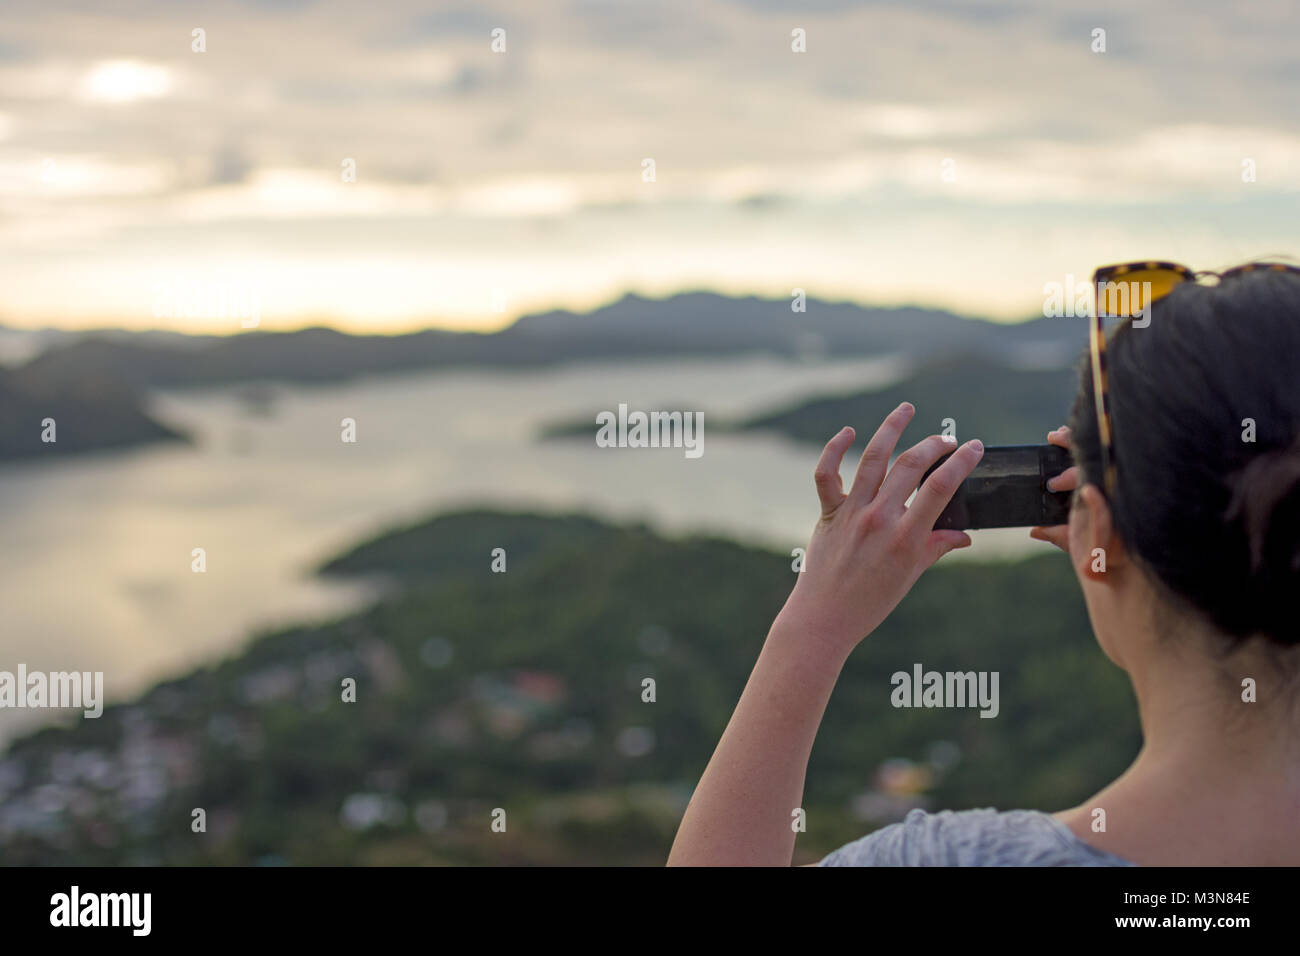 Dark haired woman taking a smart phone photo in an elevated view of the sea and islands around Coron, Palawan Philippines. Stock Photo